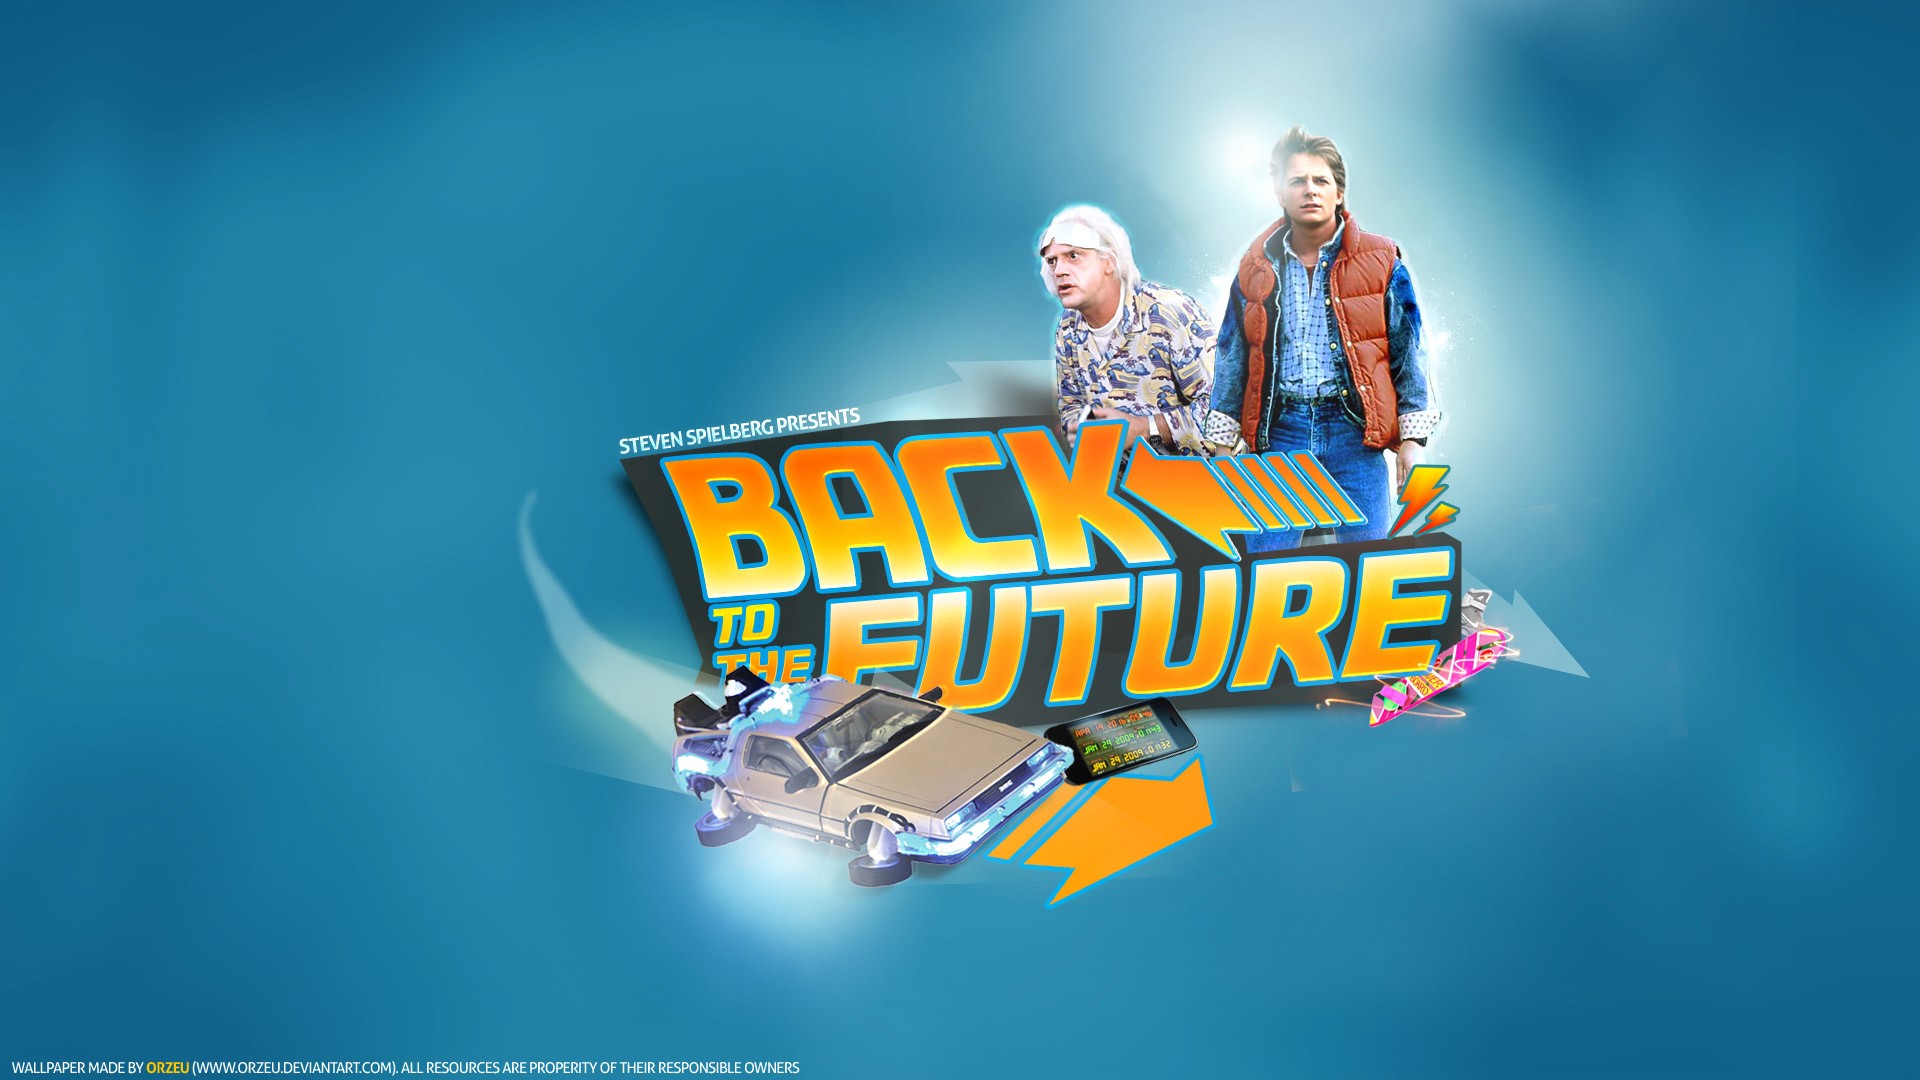 Back to the Future, blue, Back to the Future III (Movie), Marty McFly, car, Back to the Future II (Movies), Dr. Emmett Brown HD Wallpaper